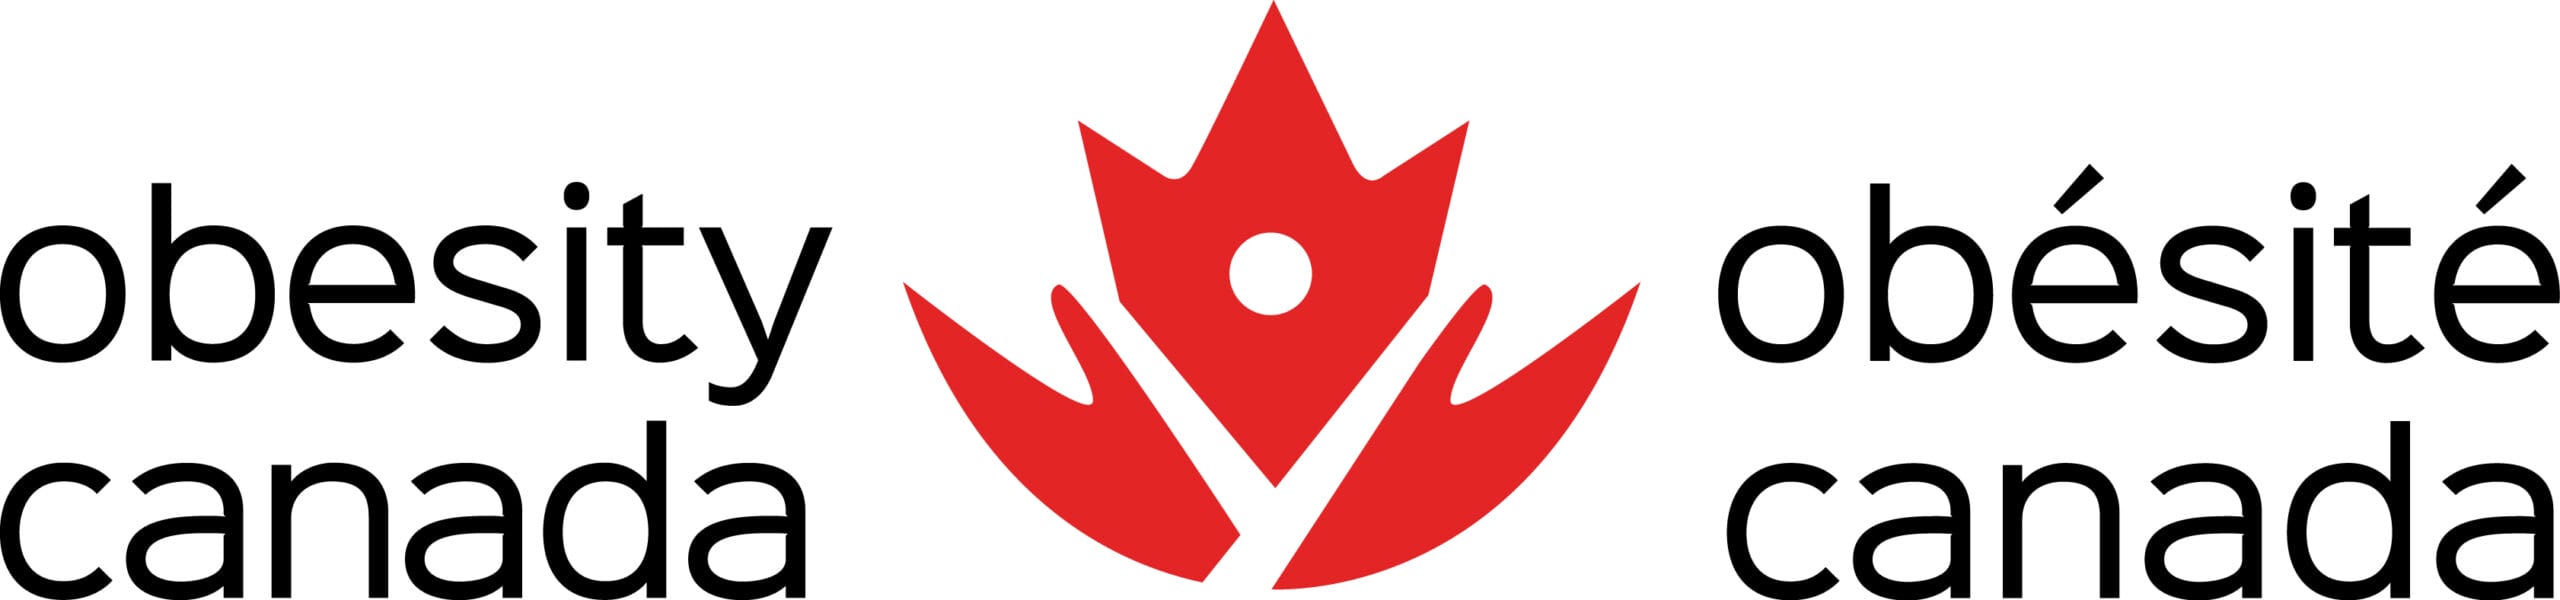 Logo of obesity canada featuring the word "obesity" in english and "obésité" in french with a stylized red maple leaf and human figure above the text.